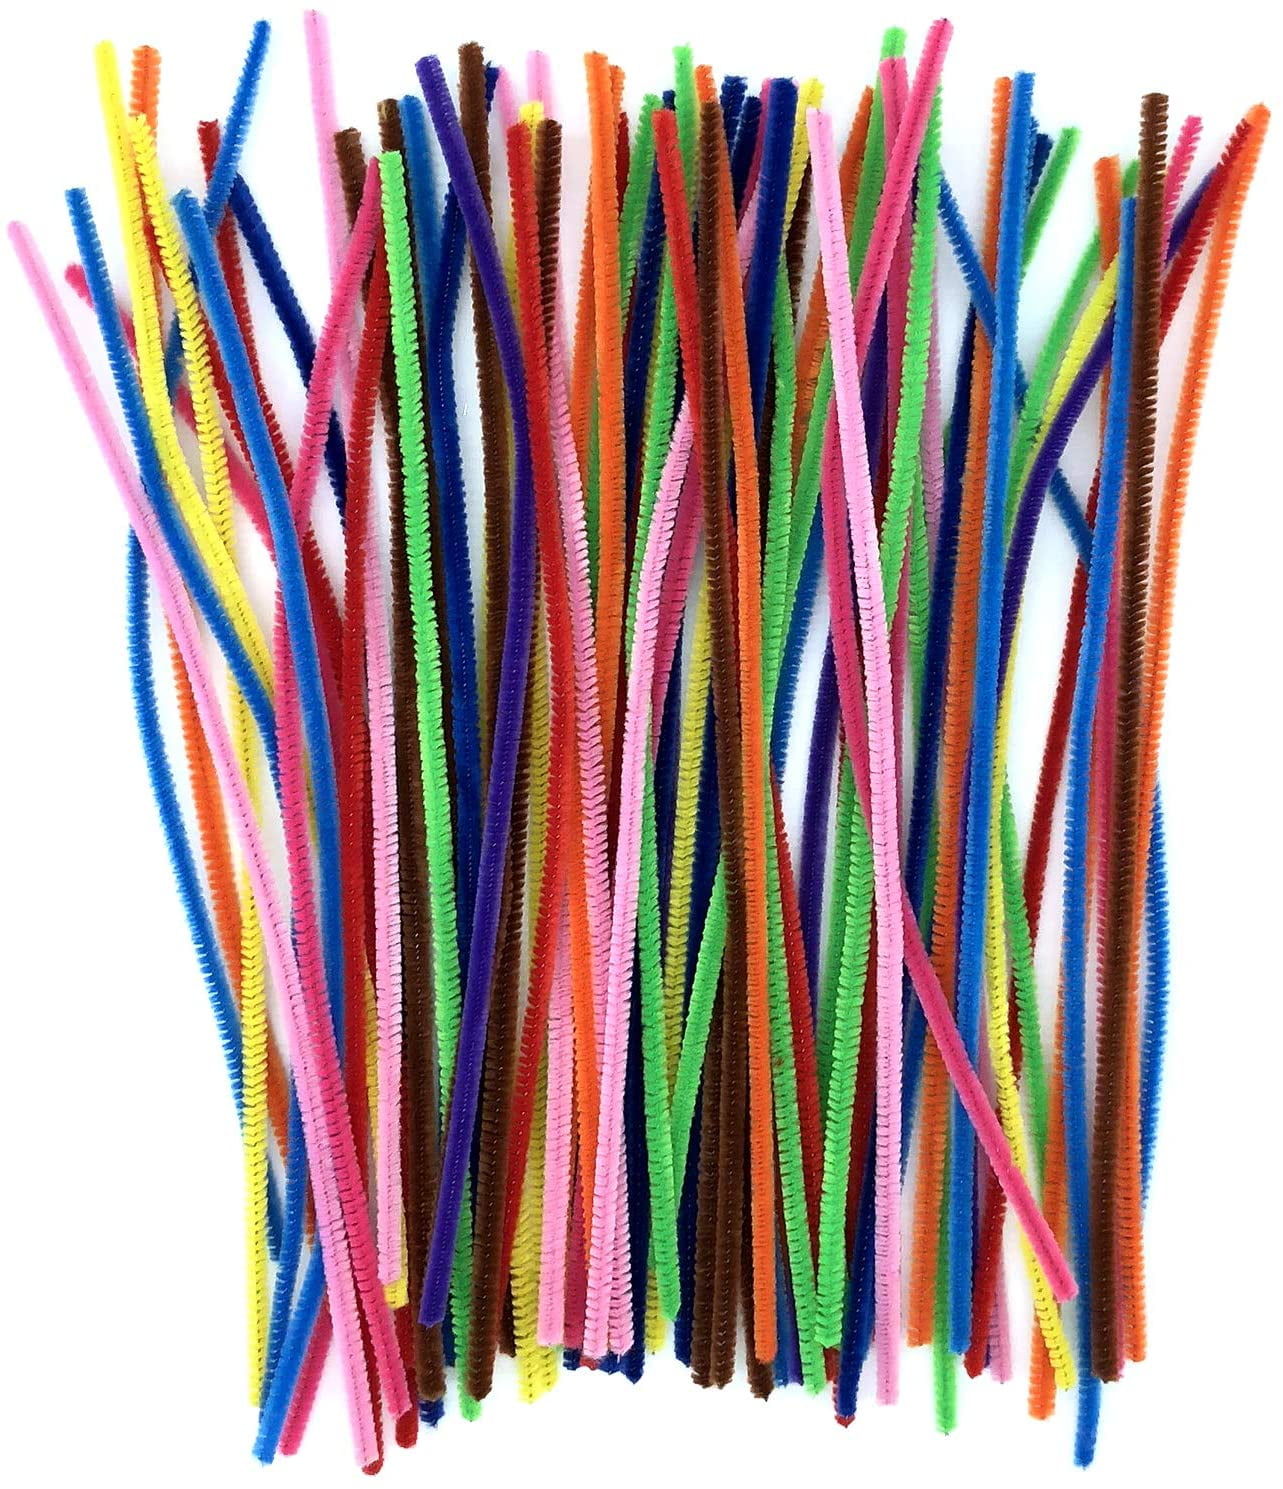 100PCS Craft Chenille Stems Pipe Cleaners 6mm x 12" Top Quality 25 colors 